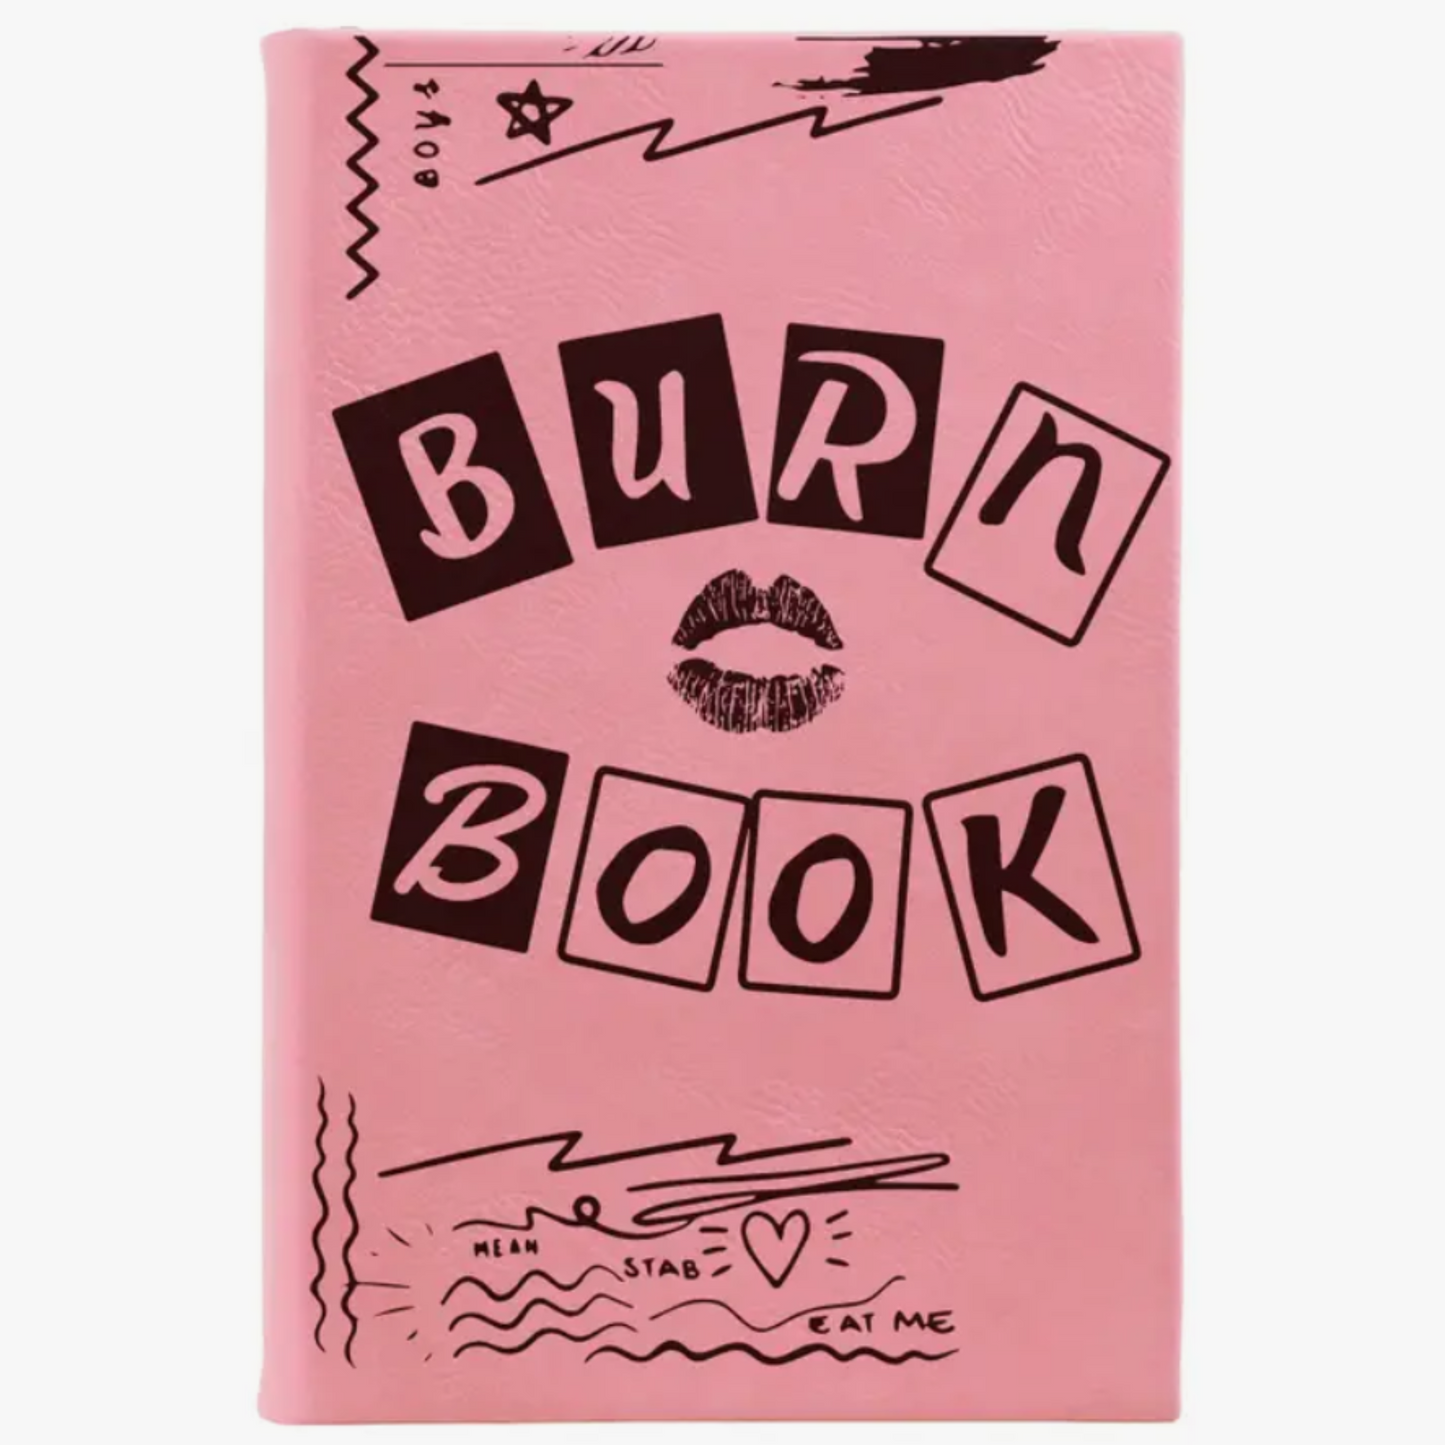 Burn Book - Mean Girls Leather Journal